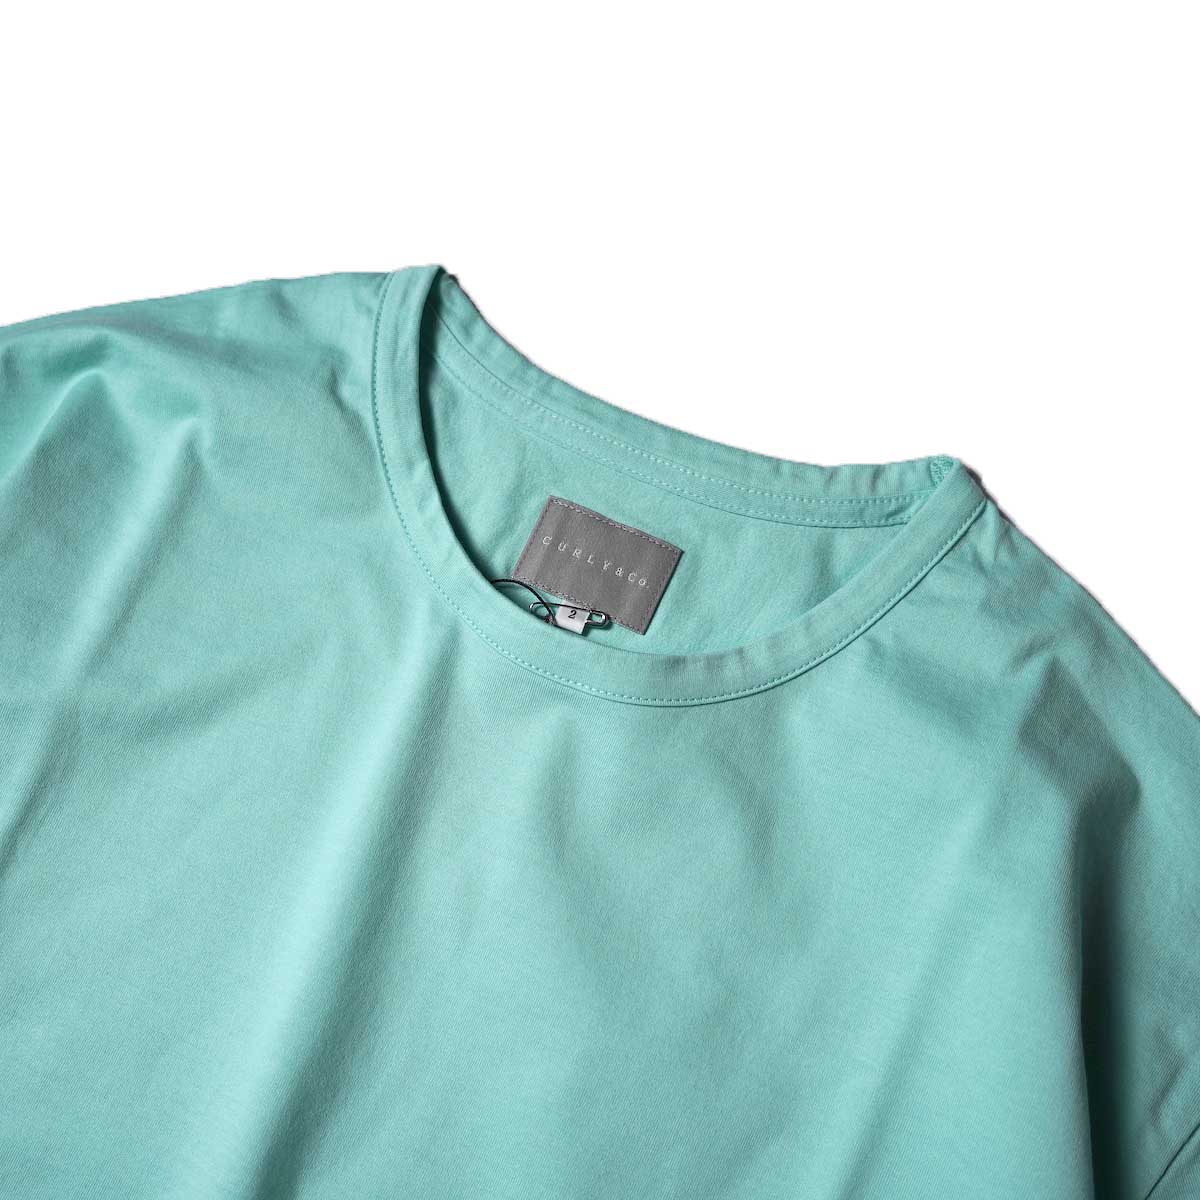 CURLY / SDH H/S CN TEE (Mint)ネック